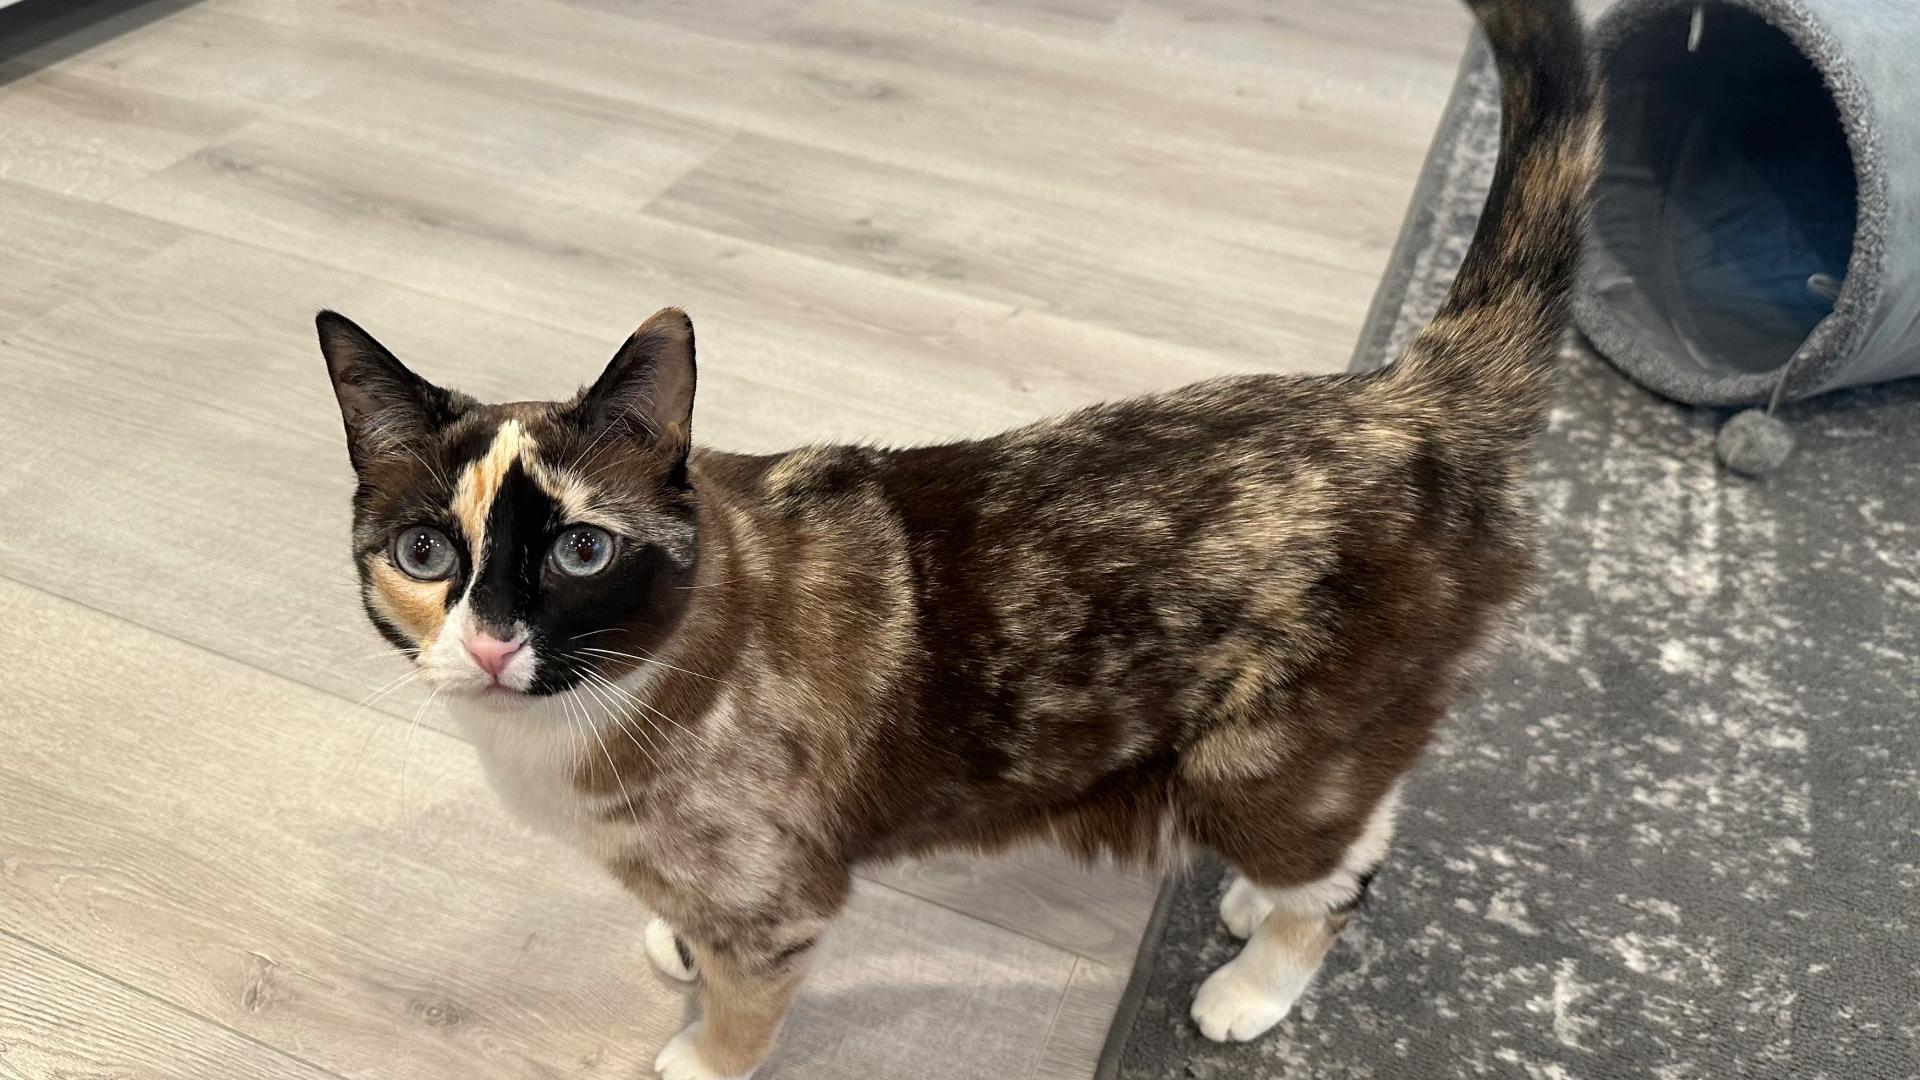 The cat Galena mysteriously disappeared from the home and was found miles away at an Amazon warehouse. The cat and owner were eventually reunited.